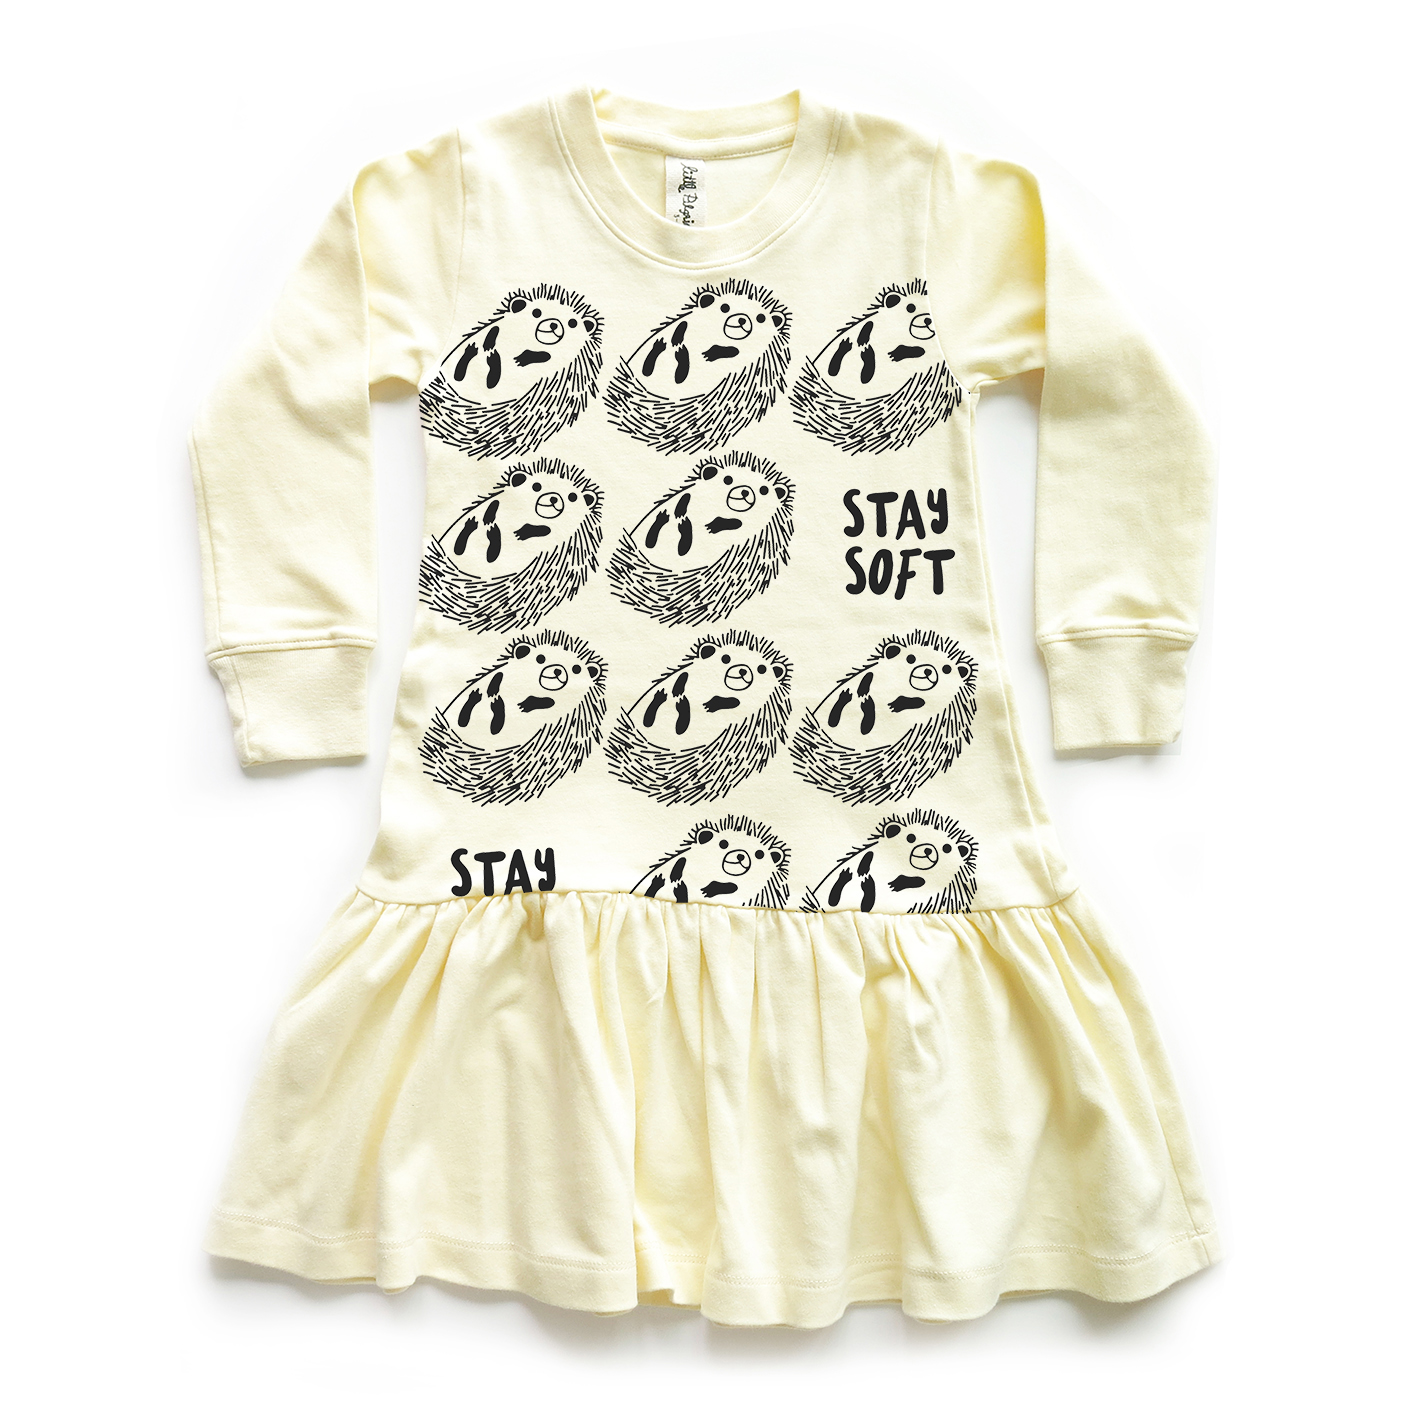 GIRL DRESS 1-7Y. LP0631 STAY SOFT DRESS WITH RUFFLED